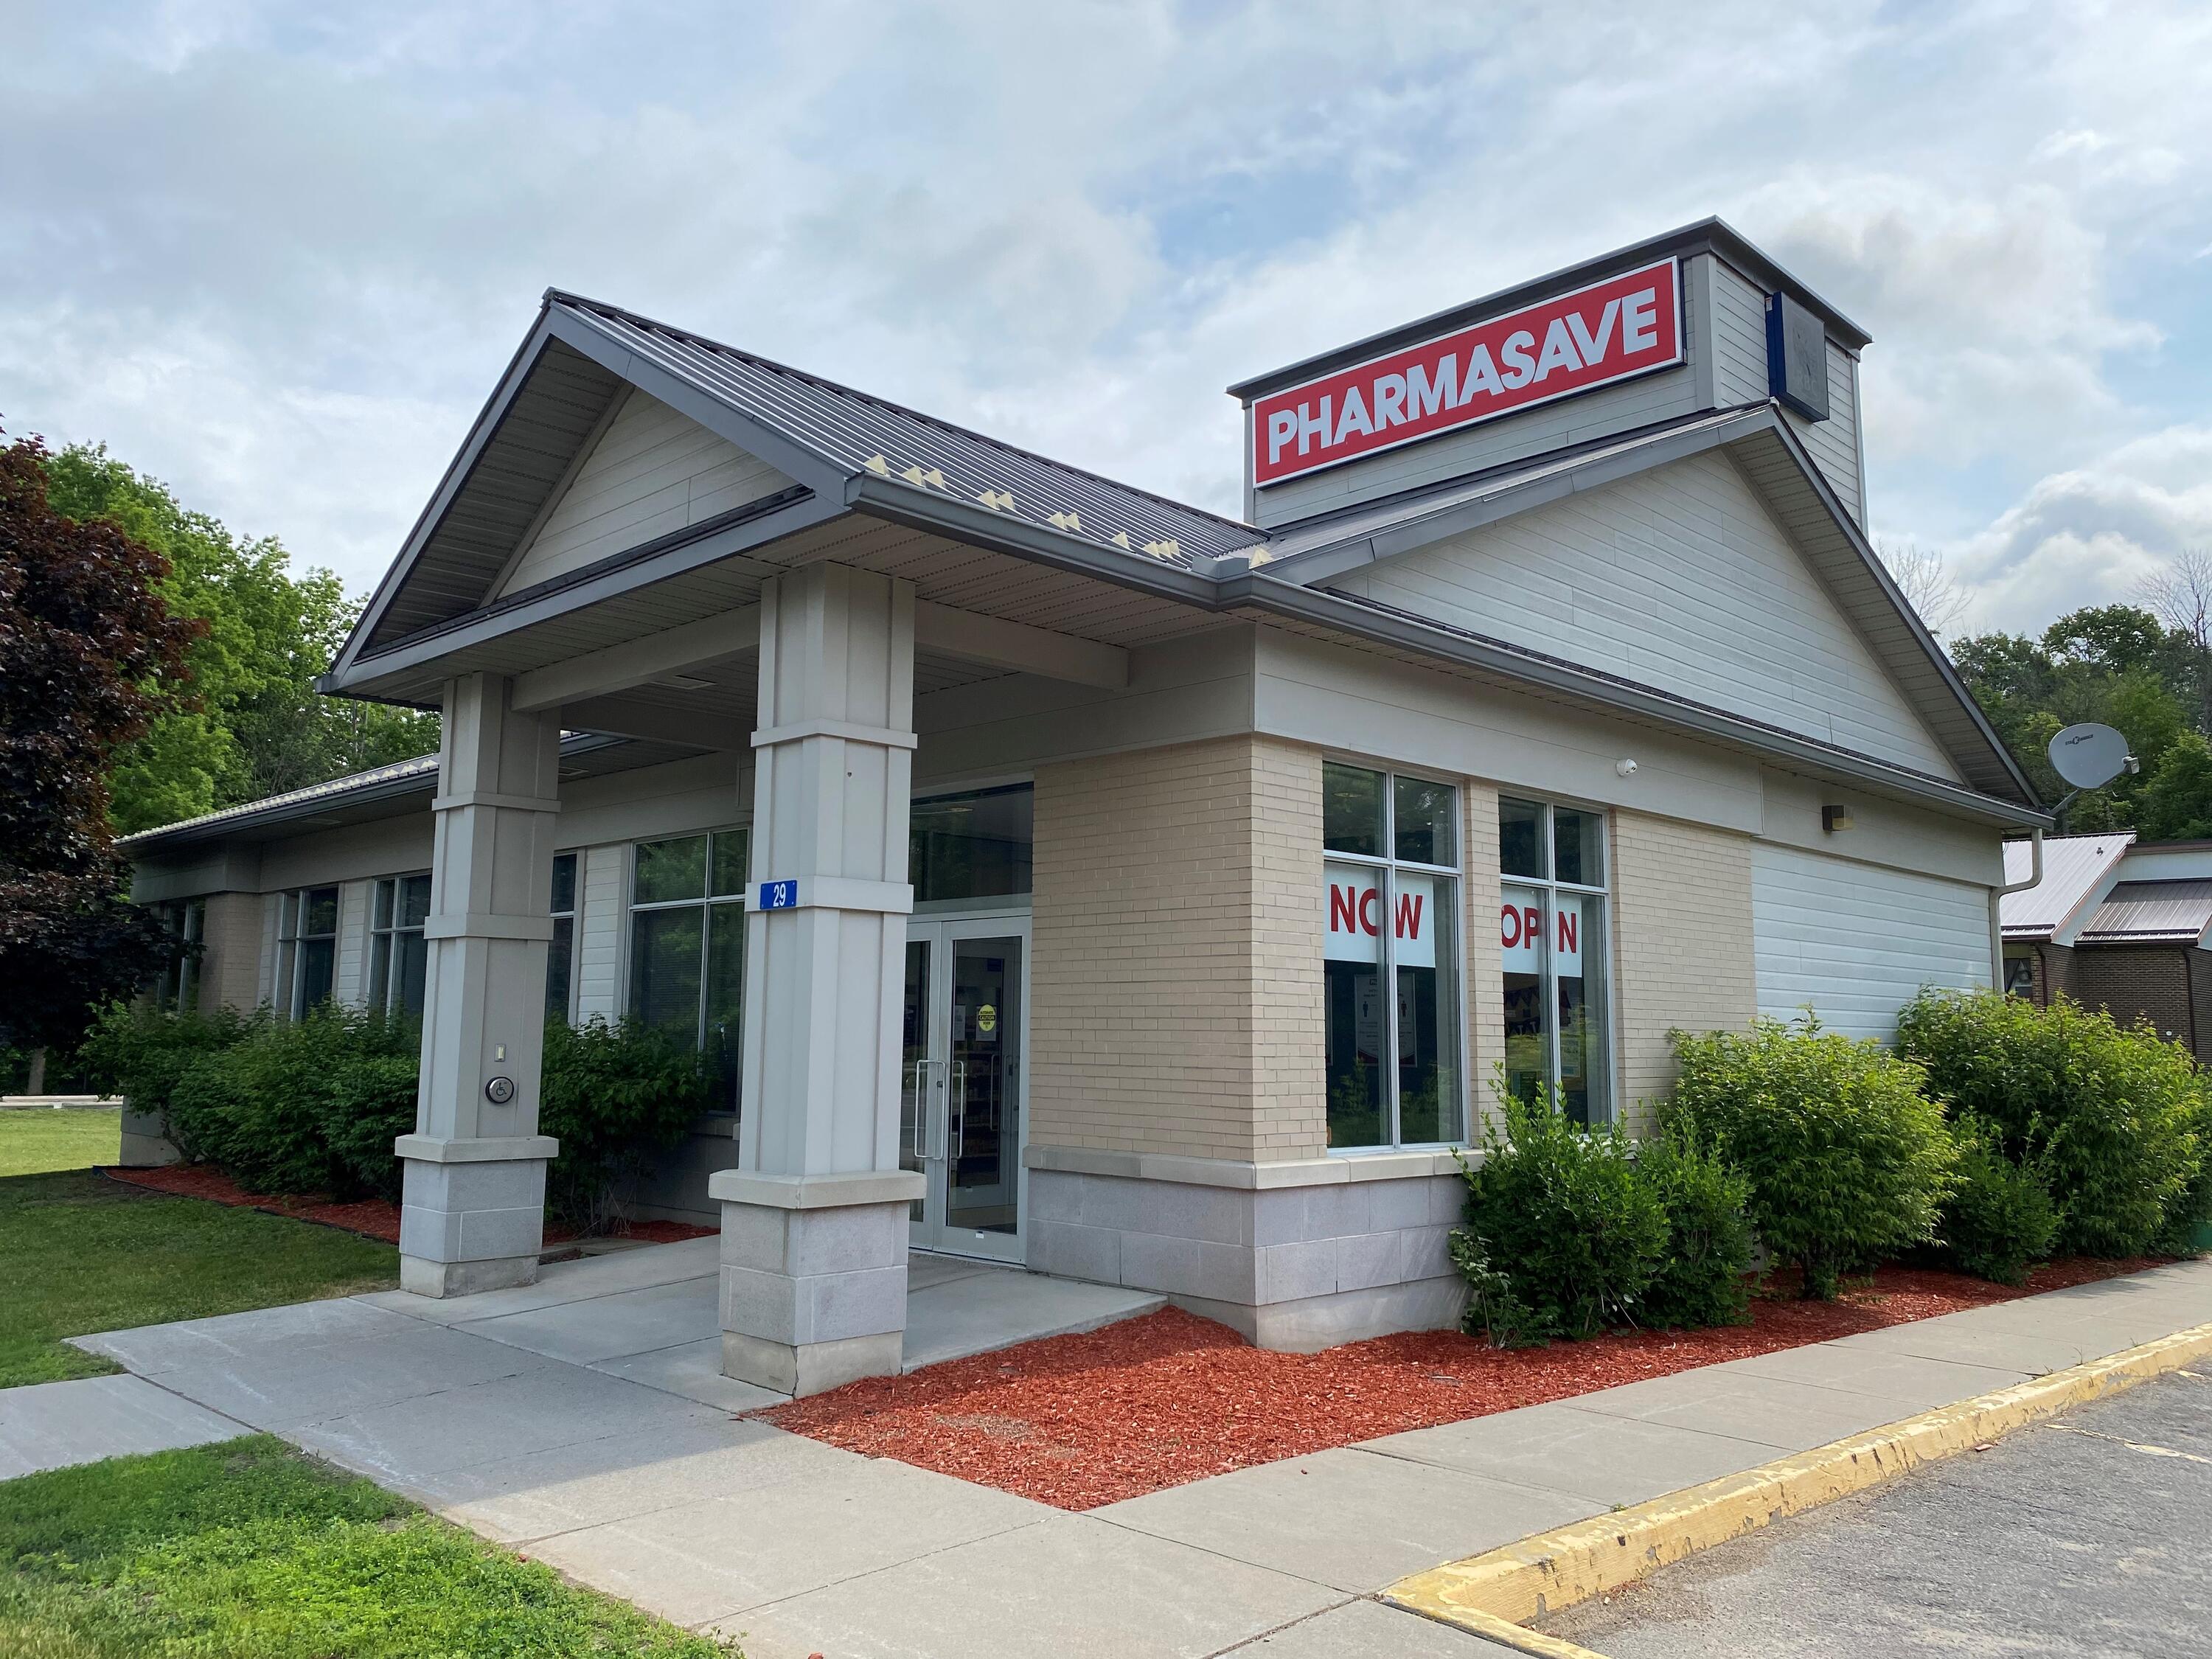 Spencerville Pharmacy from the outside